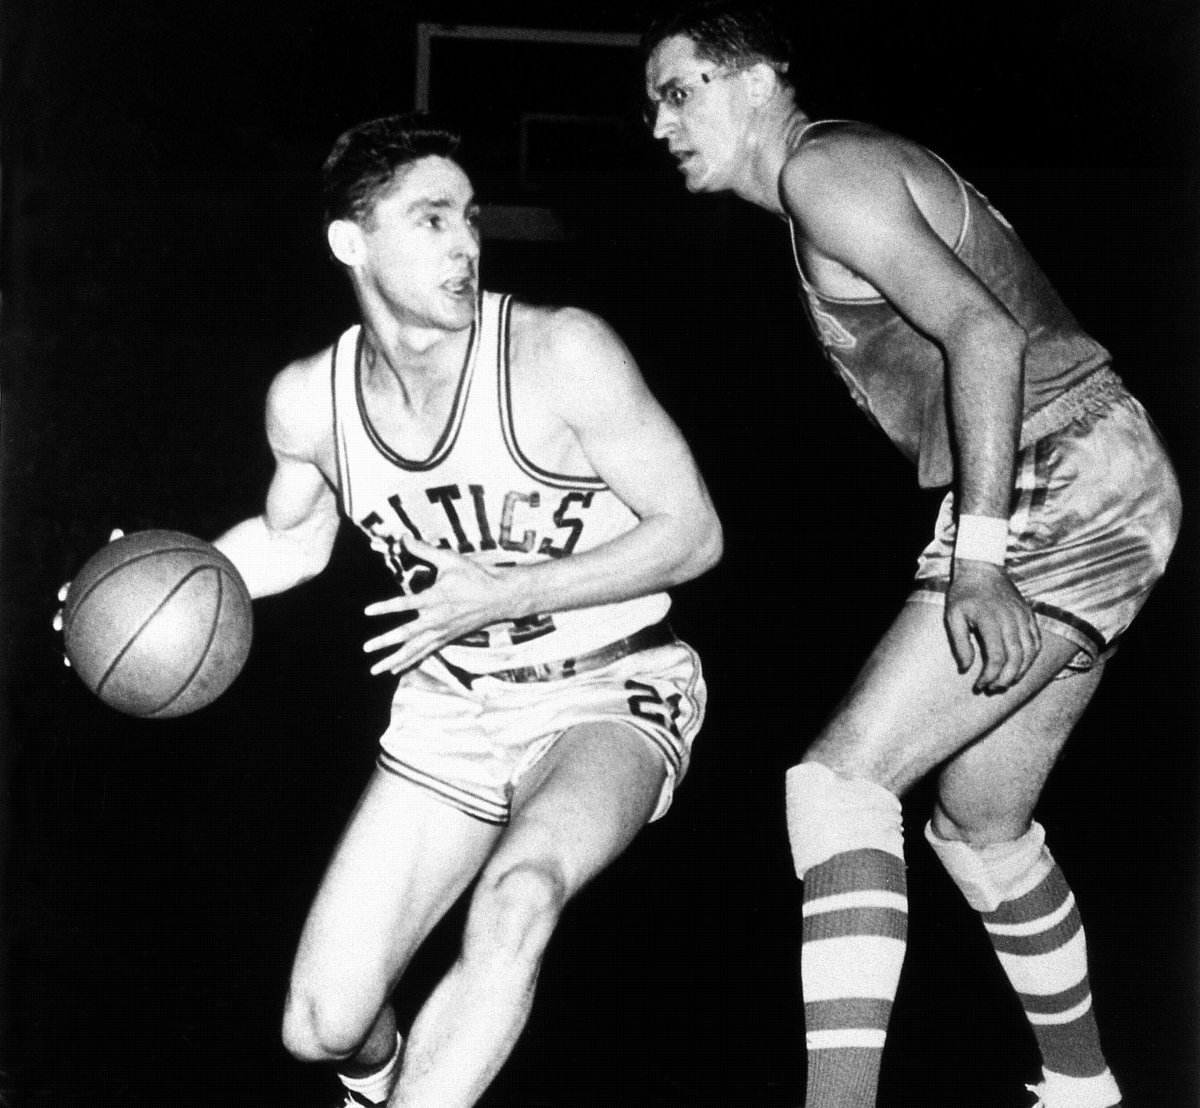 1955 All Star MVP - Bill Sharman.1955 All Star Game Stats: 15pts, 4rbd, 2ast. 50 FG%, 100 FT%.Sharman is one of the most efficient little men in NBA history. Standing just 6'1, Sharman led the NBA in FT% 7 times, shooting under 85% from the line just once in 11 seasons.